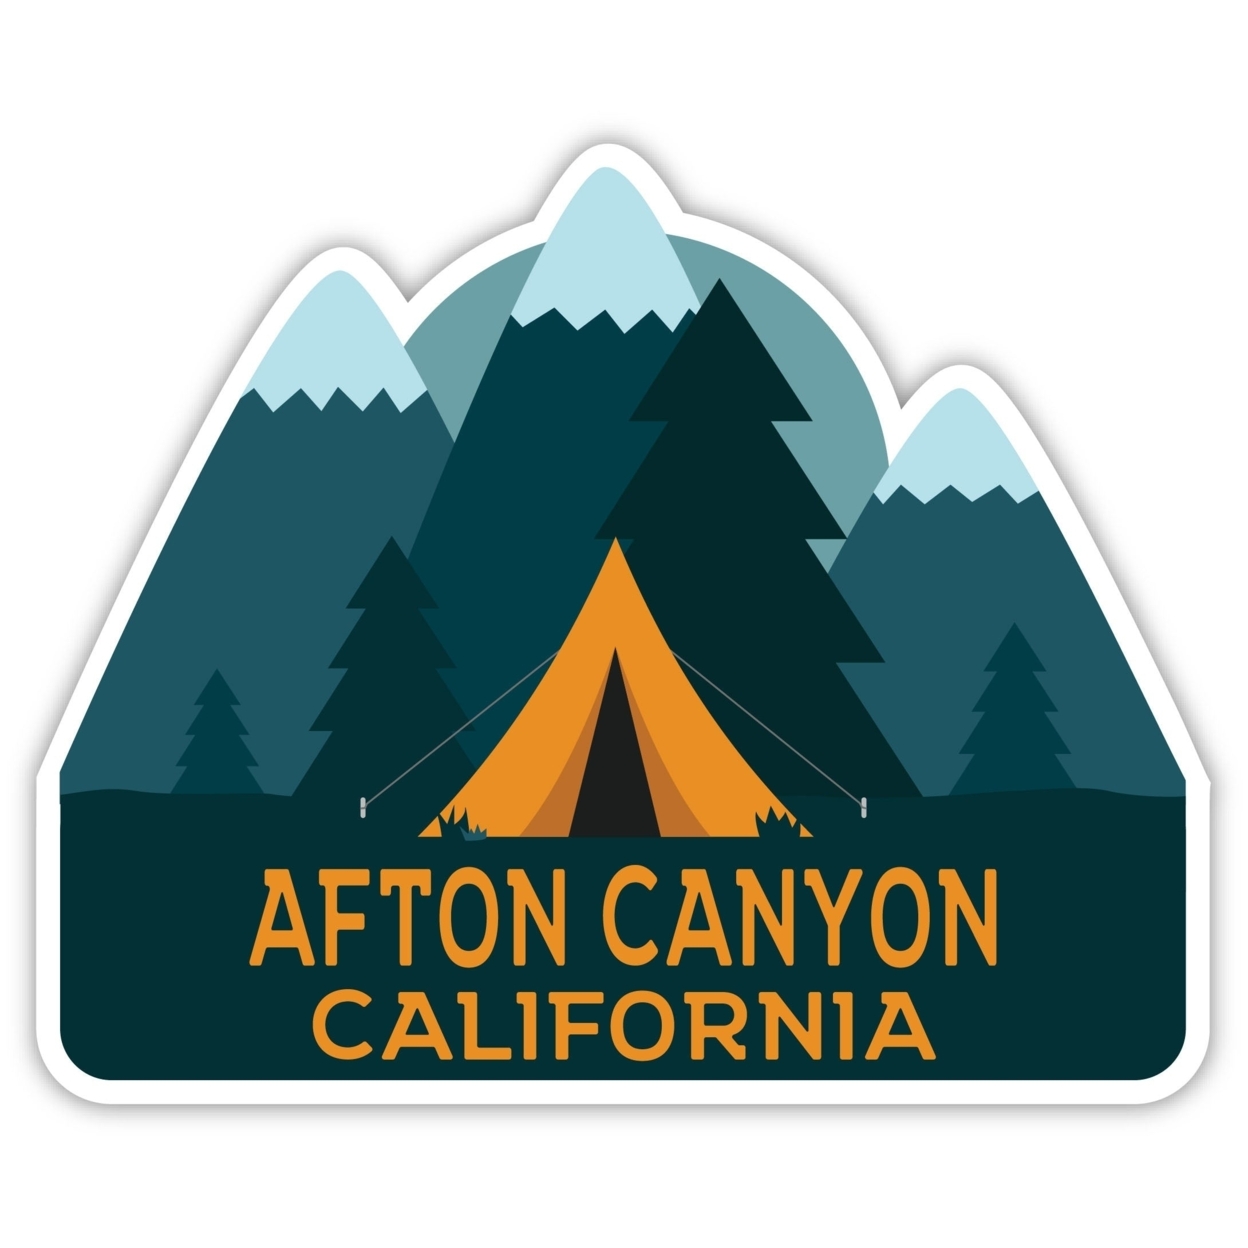 Afton Canyon California Souvenir Decorative Stickers (Choose Theme And Size) - 4-Pack, 6-Inch, Tent